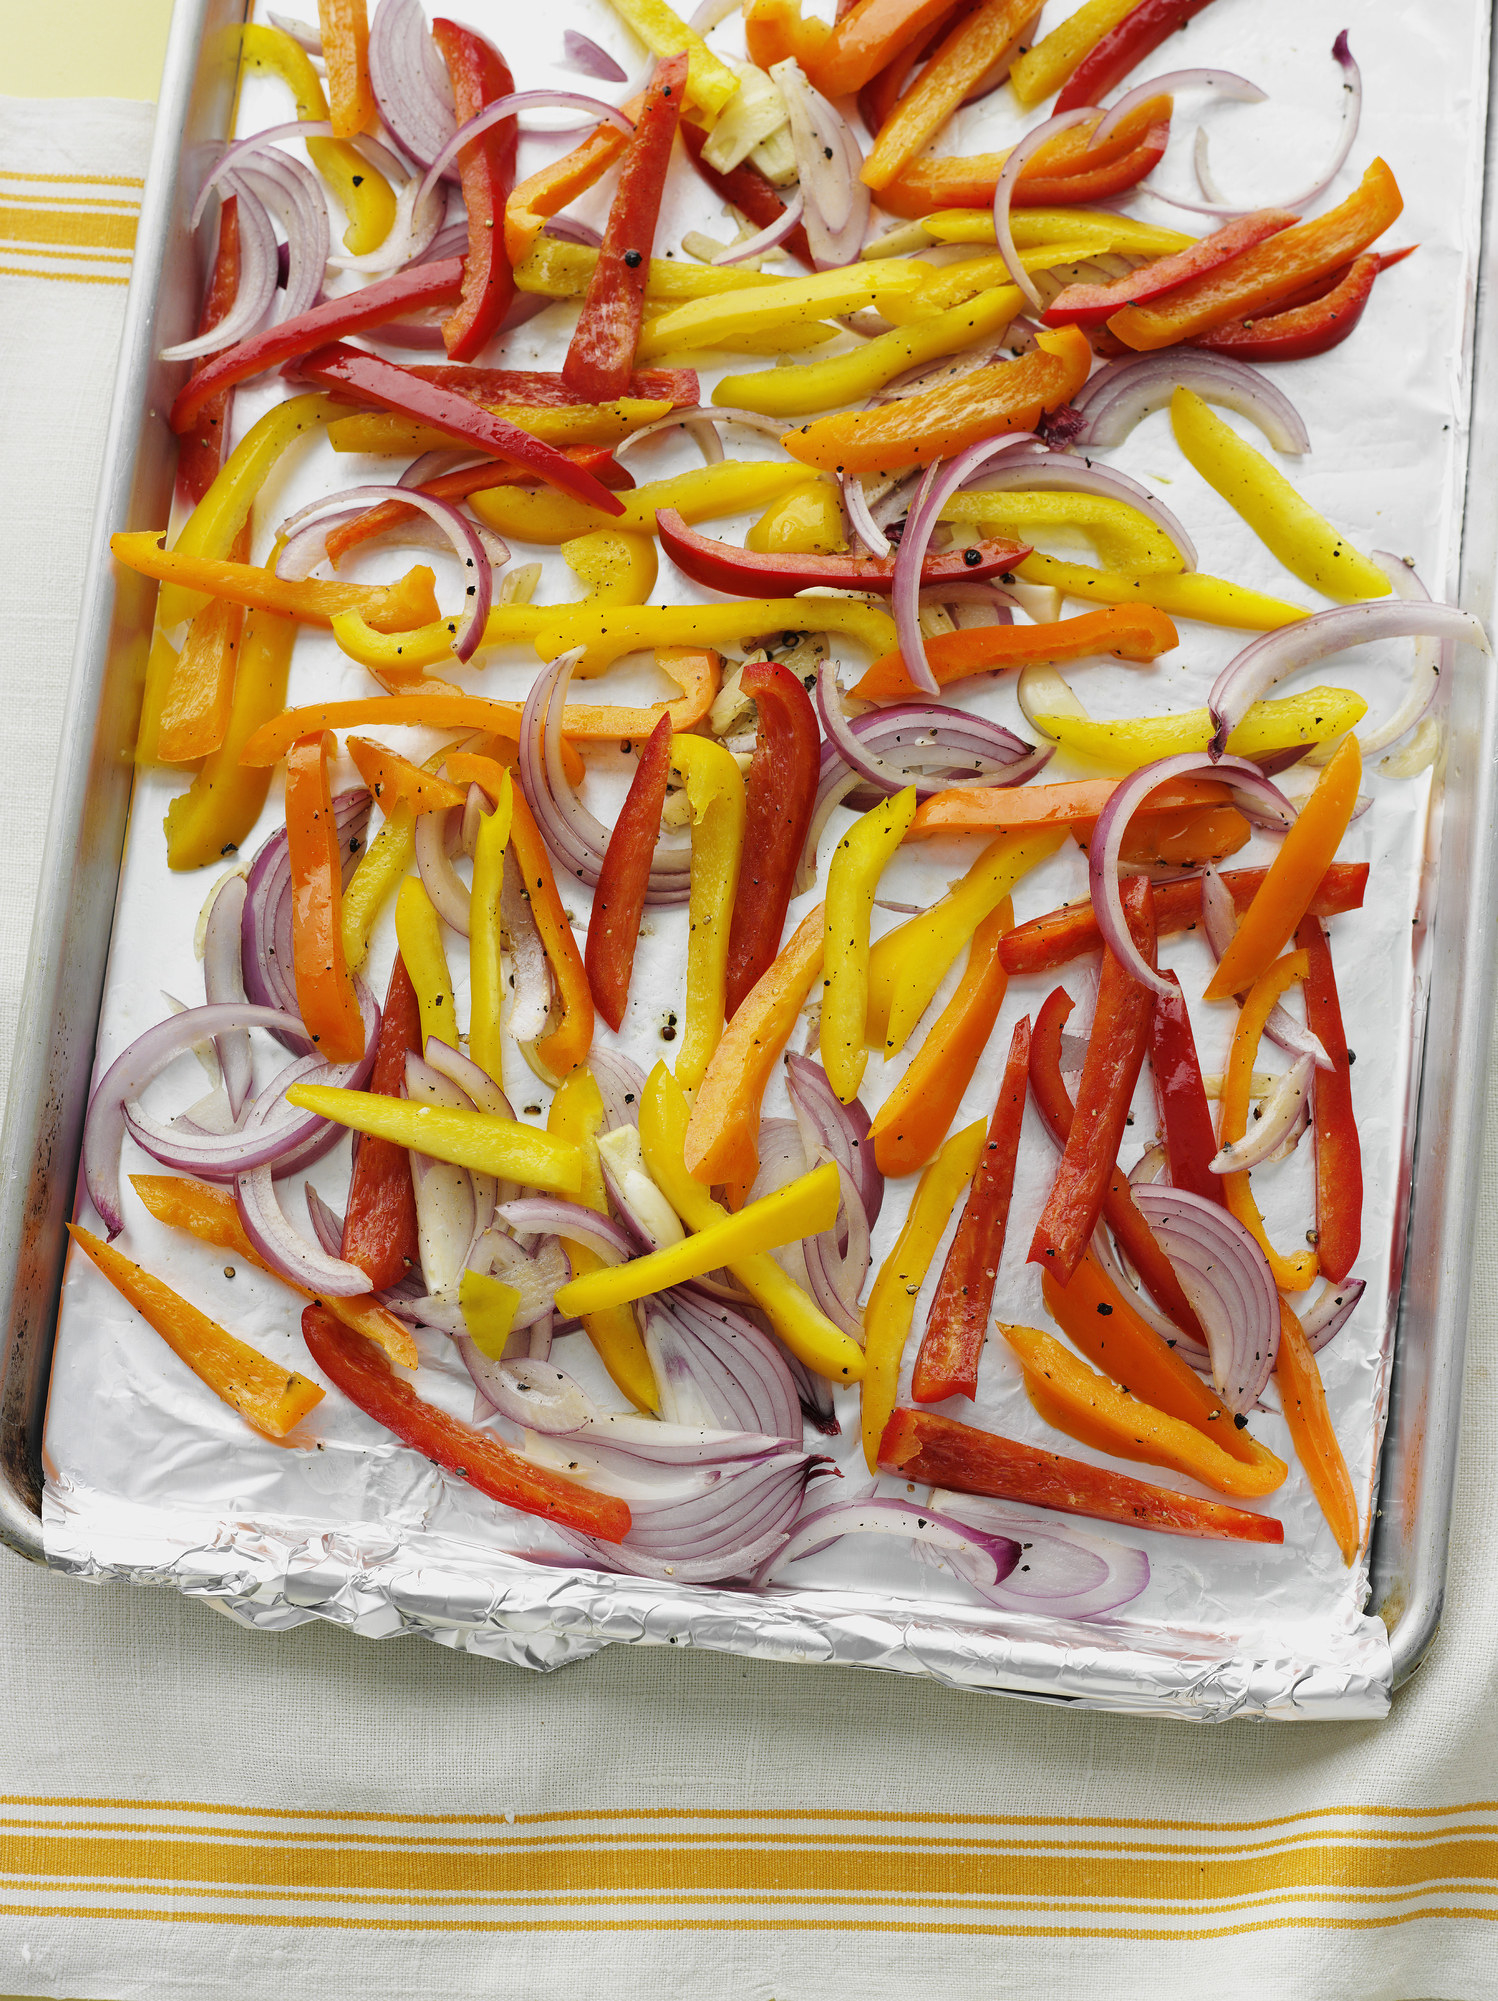 Onions and peppers on a foil lined sheet pan.